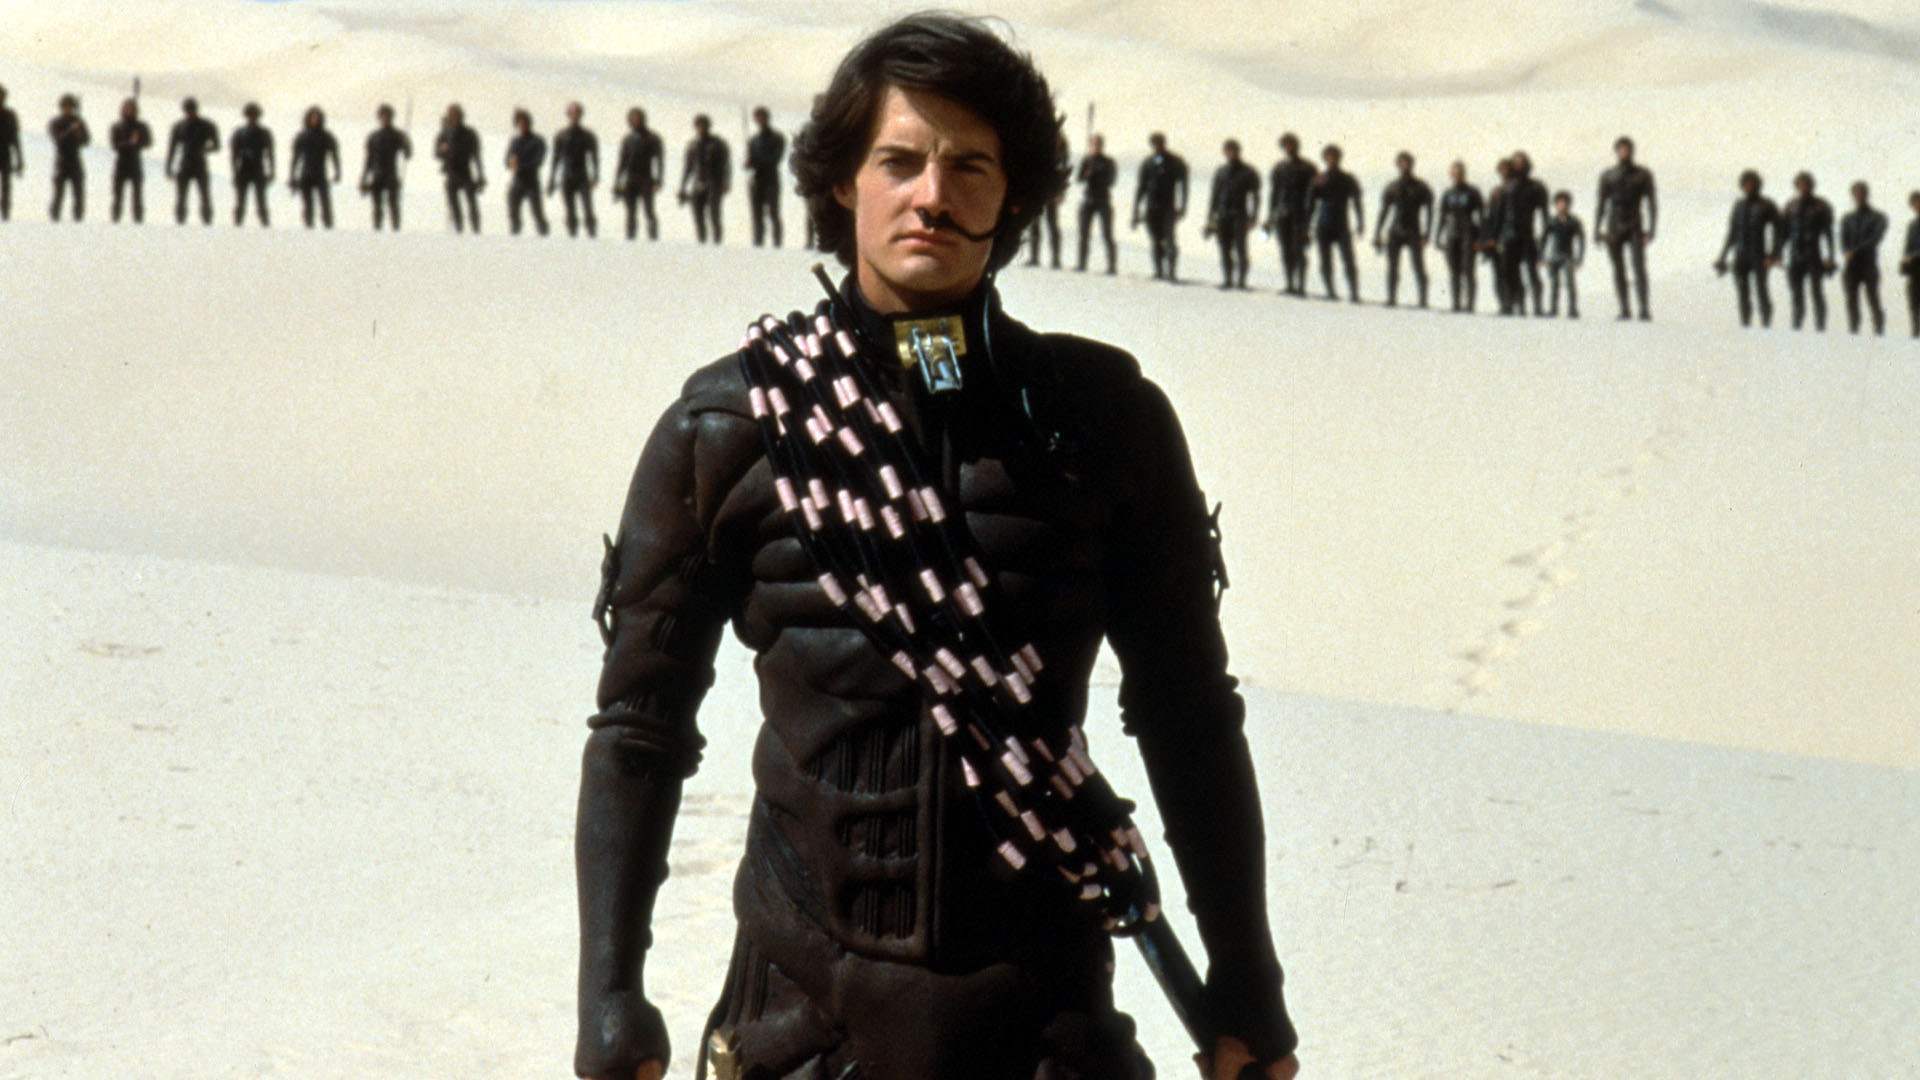 A man in an all-blac outfit and a black breathing apparatus in his nostril is in front of a line of similarly dressed people in a white desert.